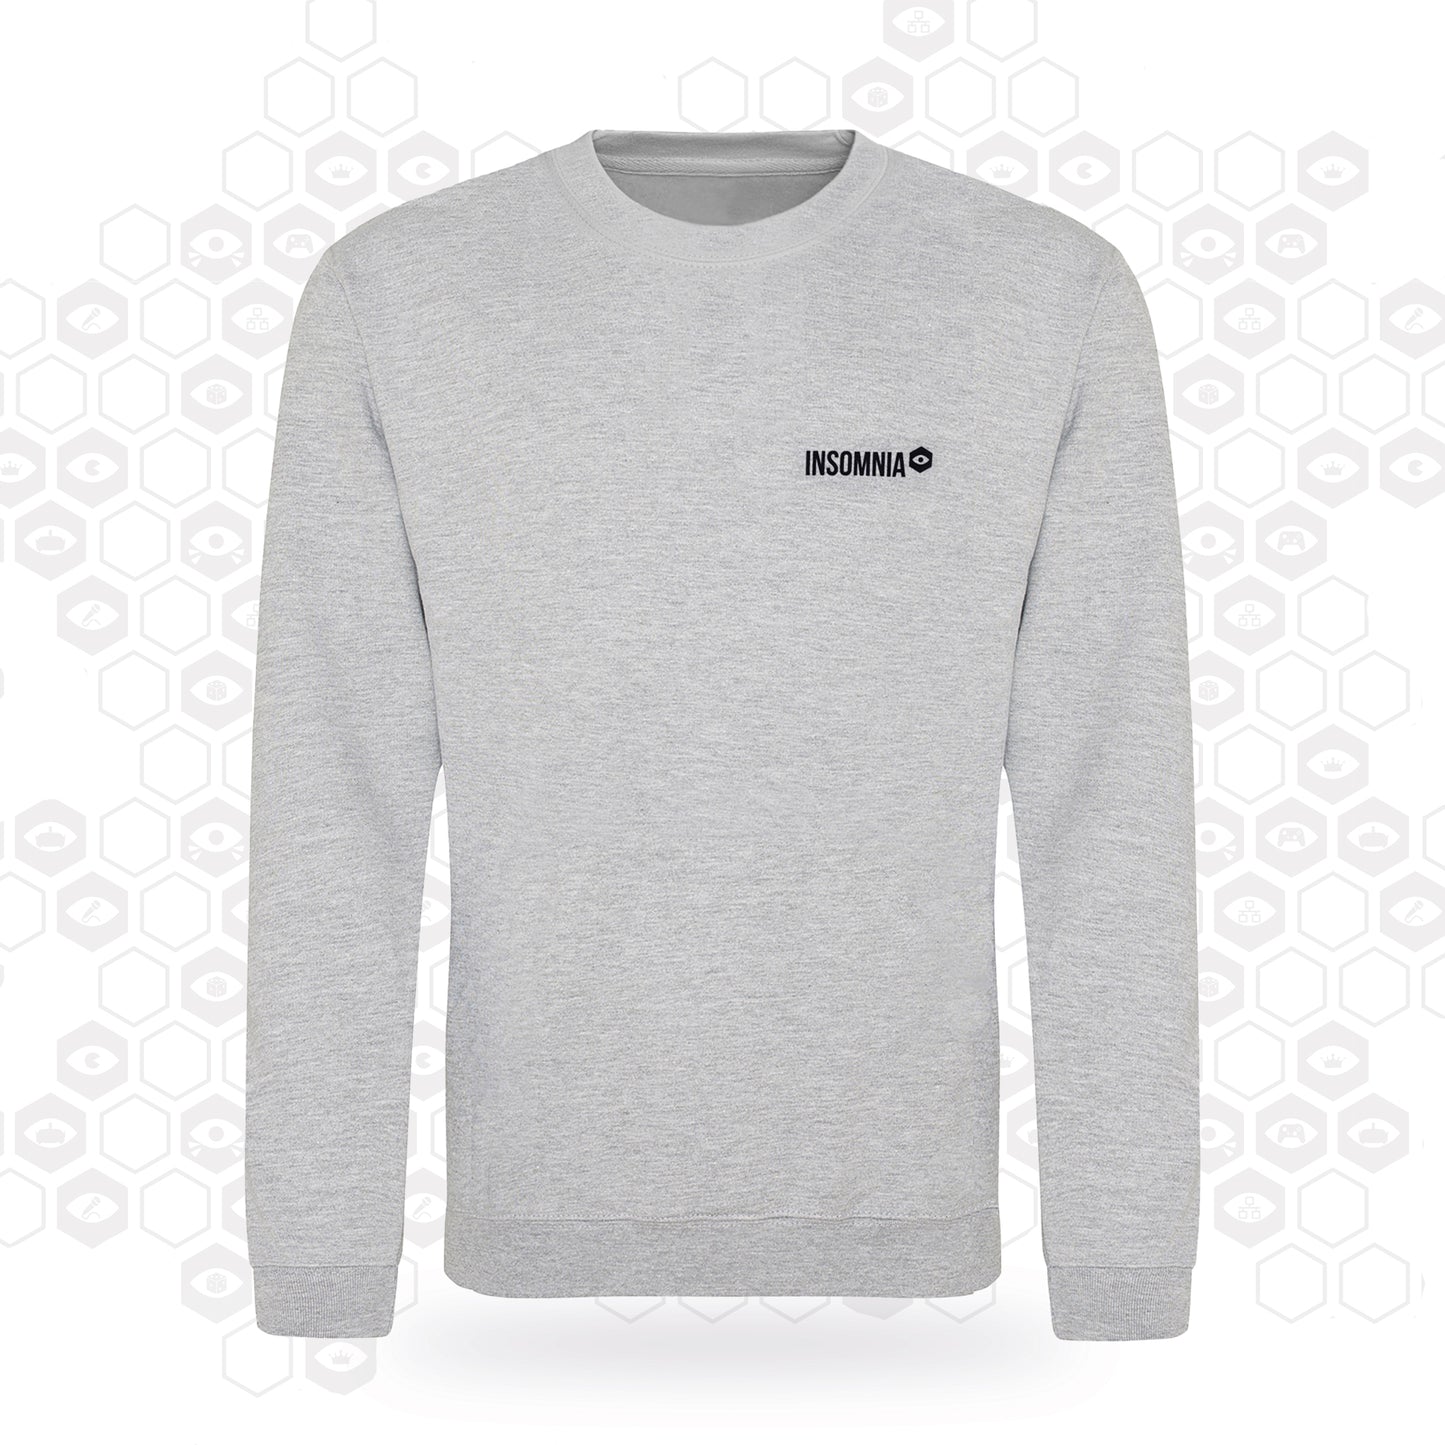 Heather grey sweatshirt with insomnia logo printed on the left chest